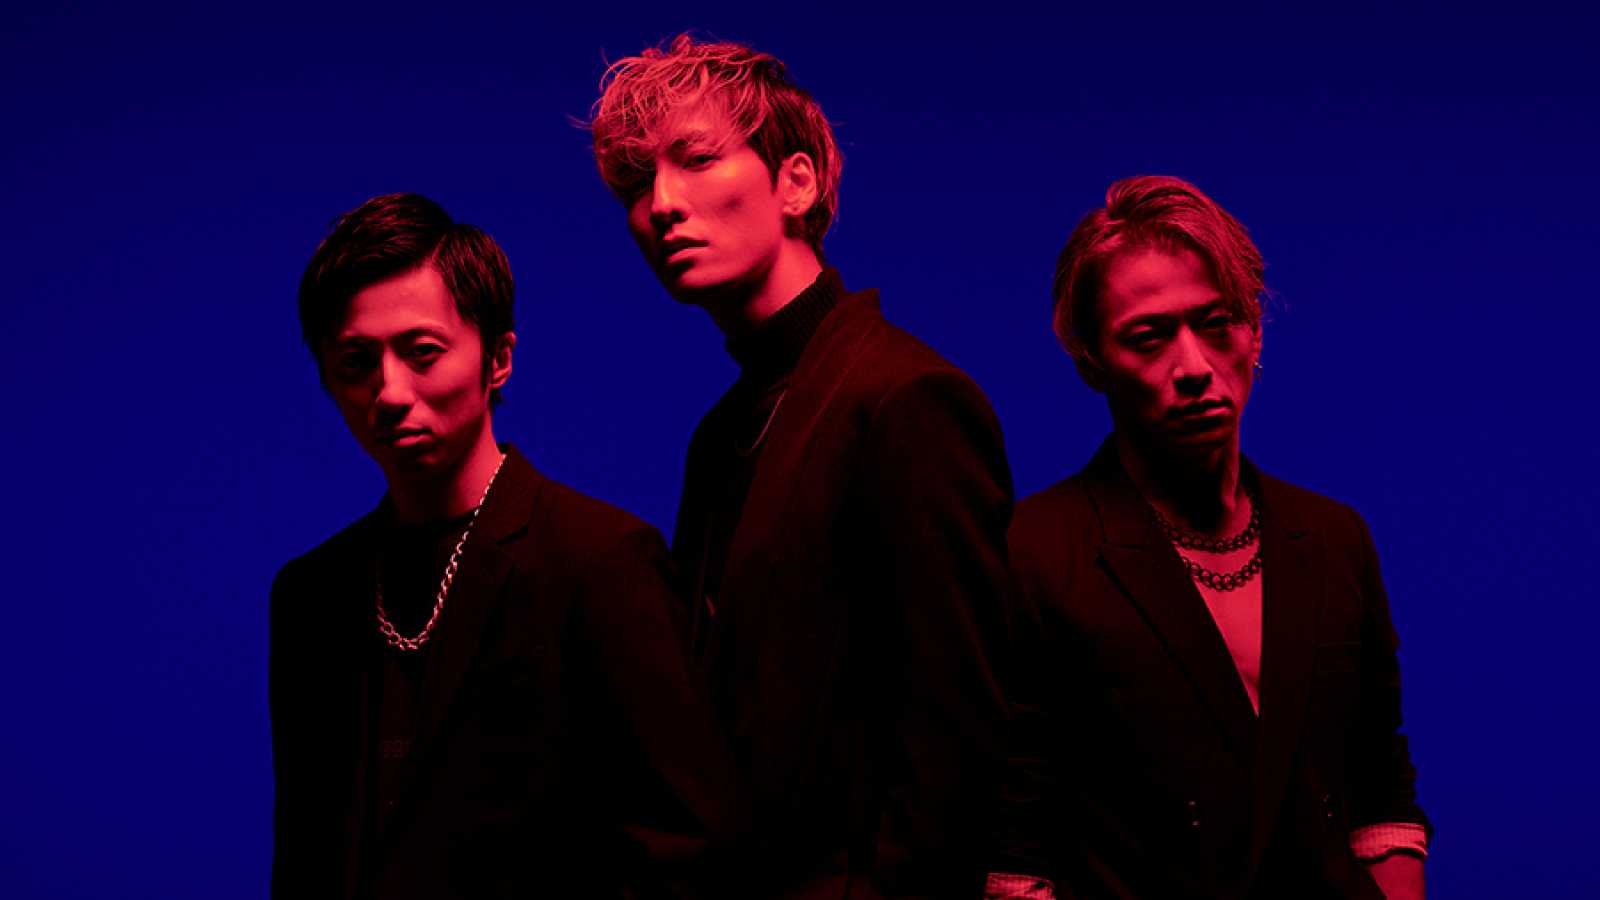 Novo single do w-inds. © PONY CANYON. All rights reserved.